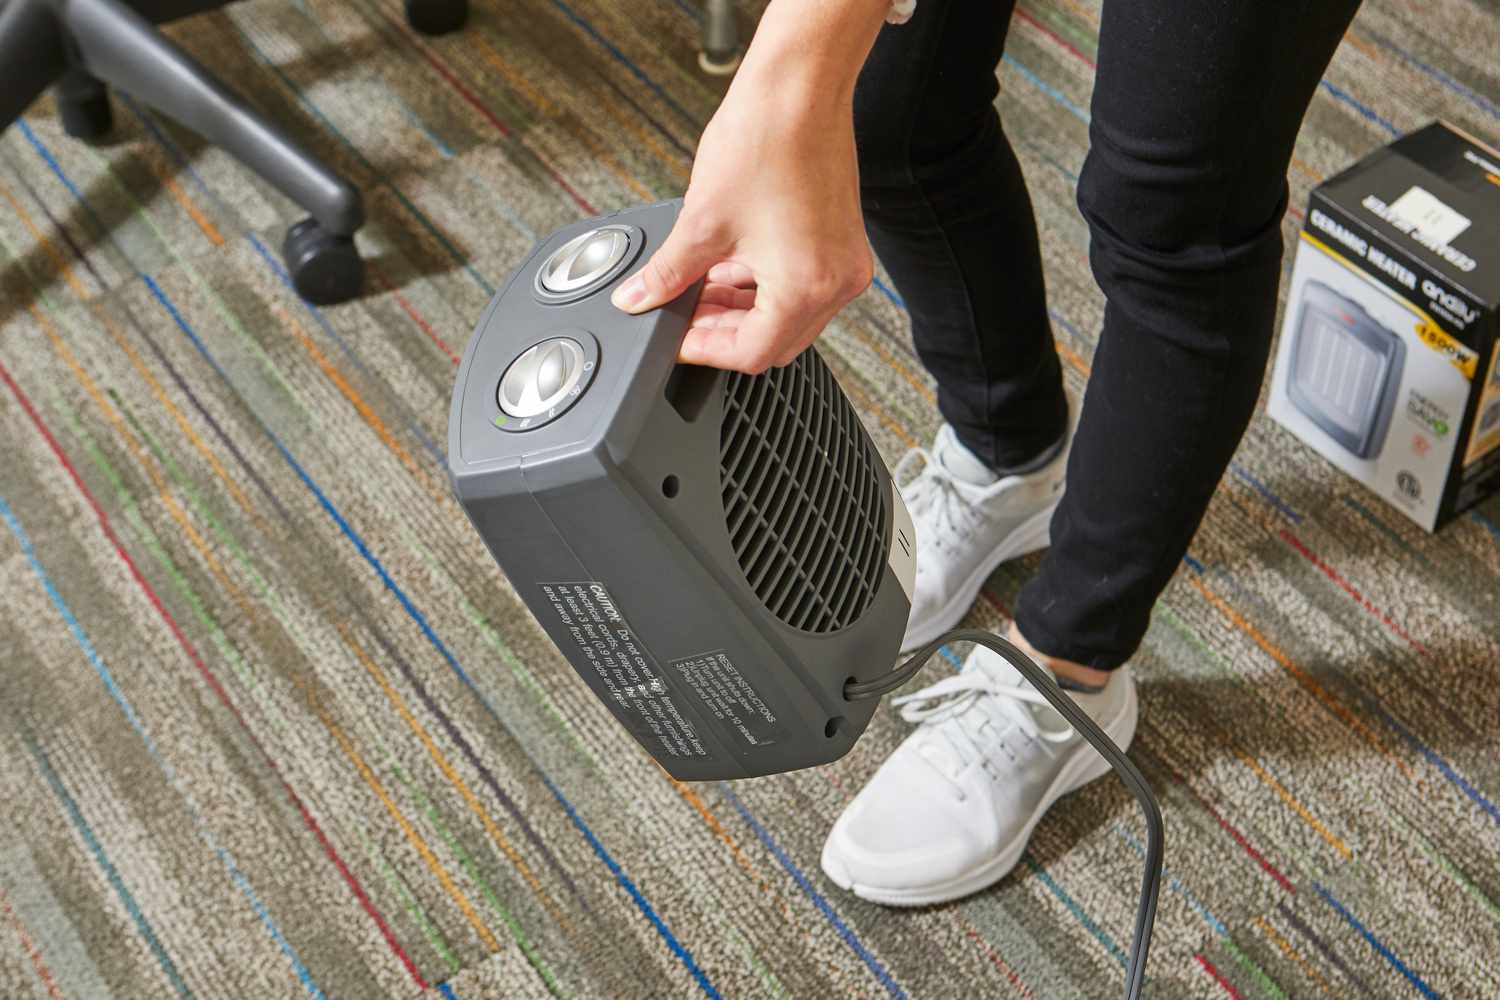 Why Does My Space Heater Keep Shutting Off?